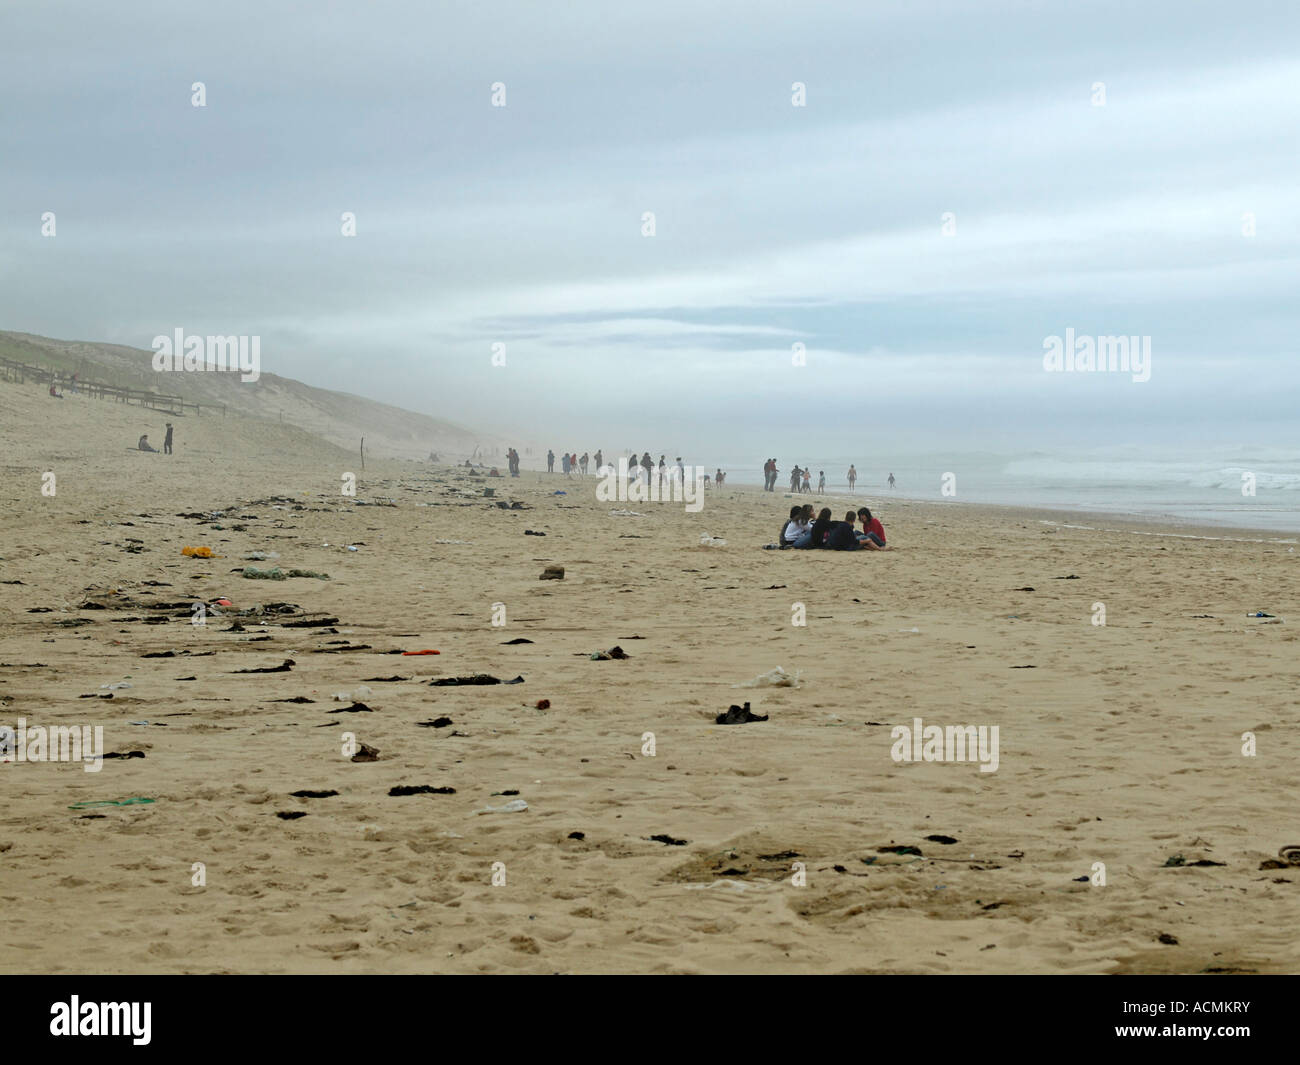 France Landes people on stormy beach with sandstorm and rubbish on sand Stock Photo